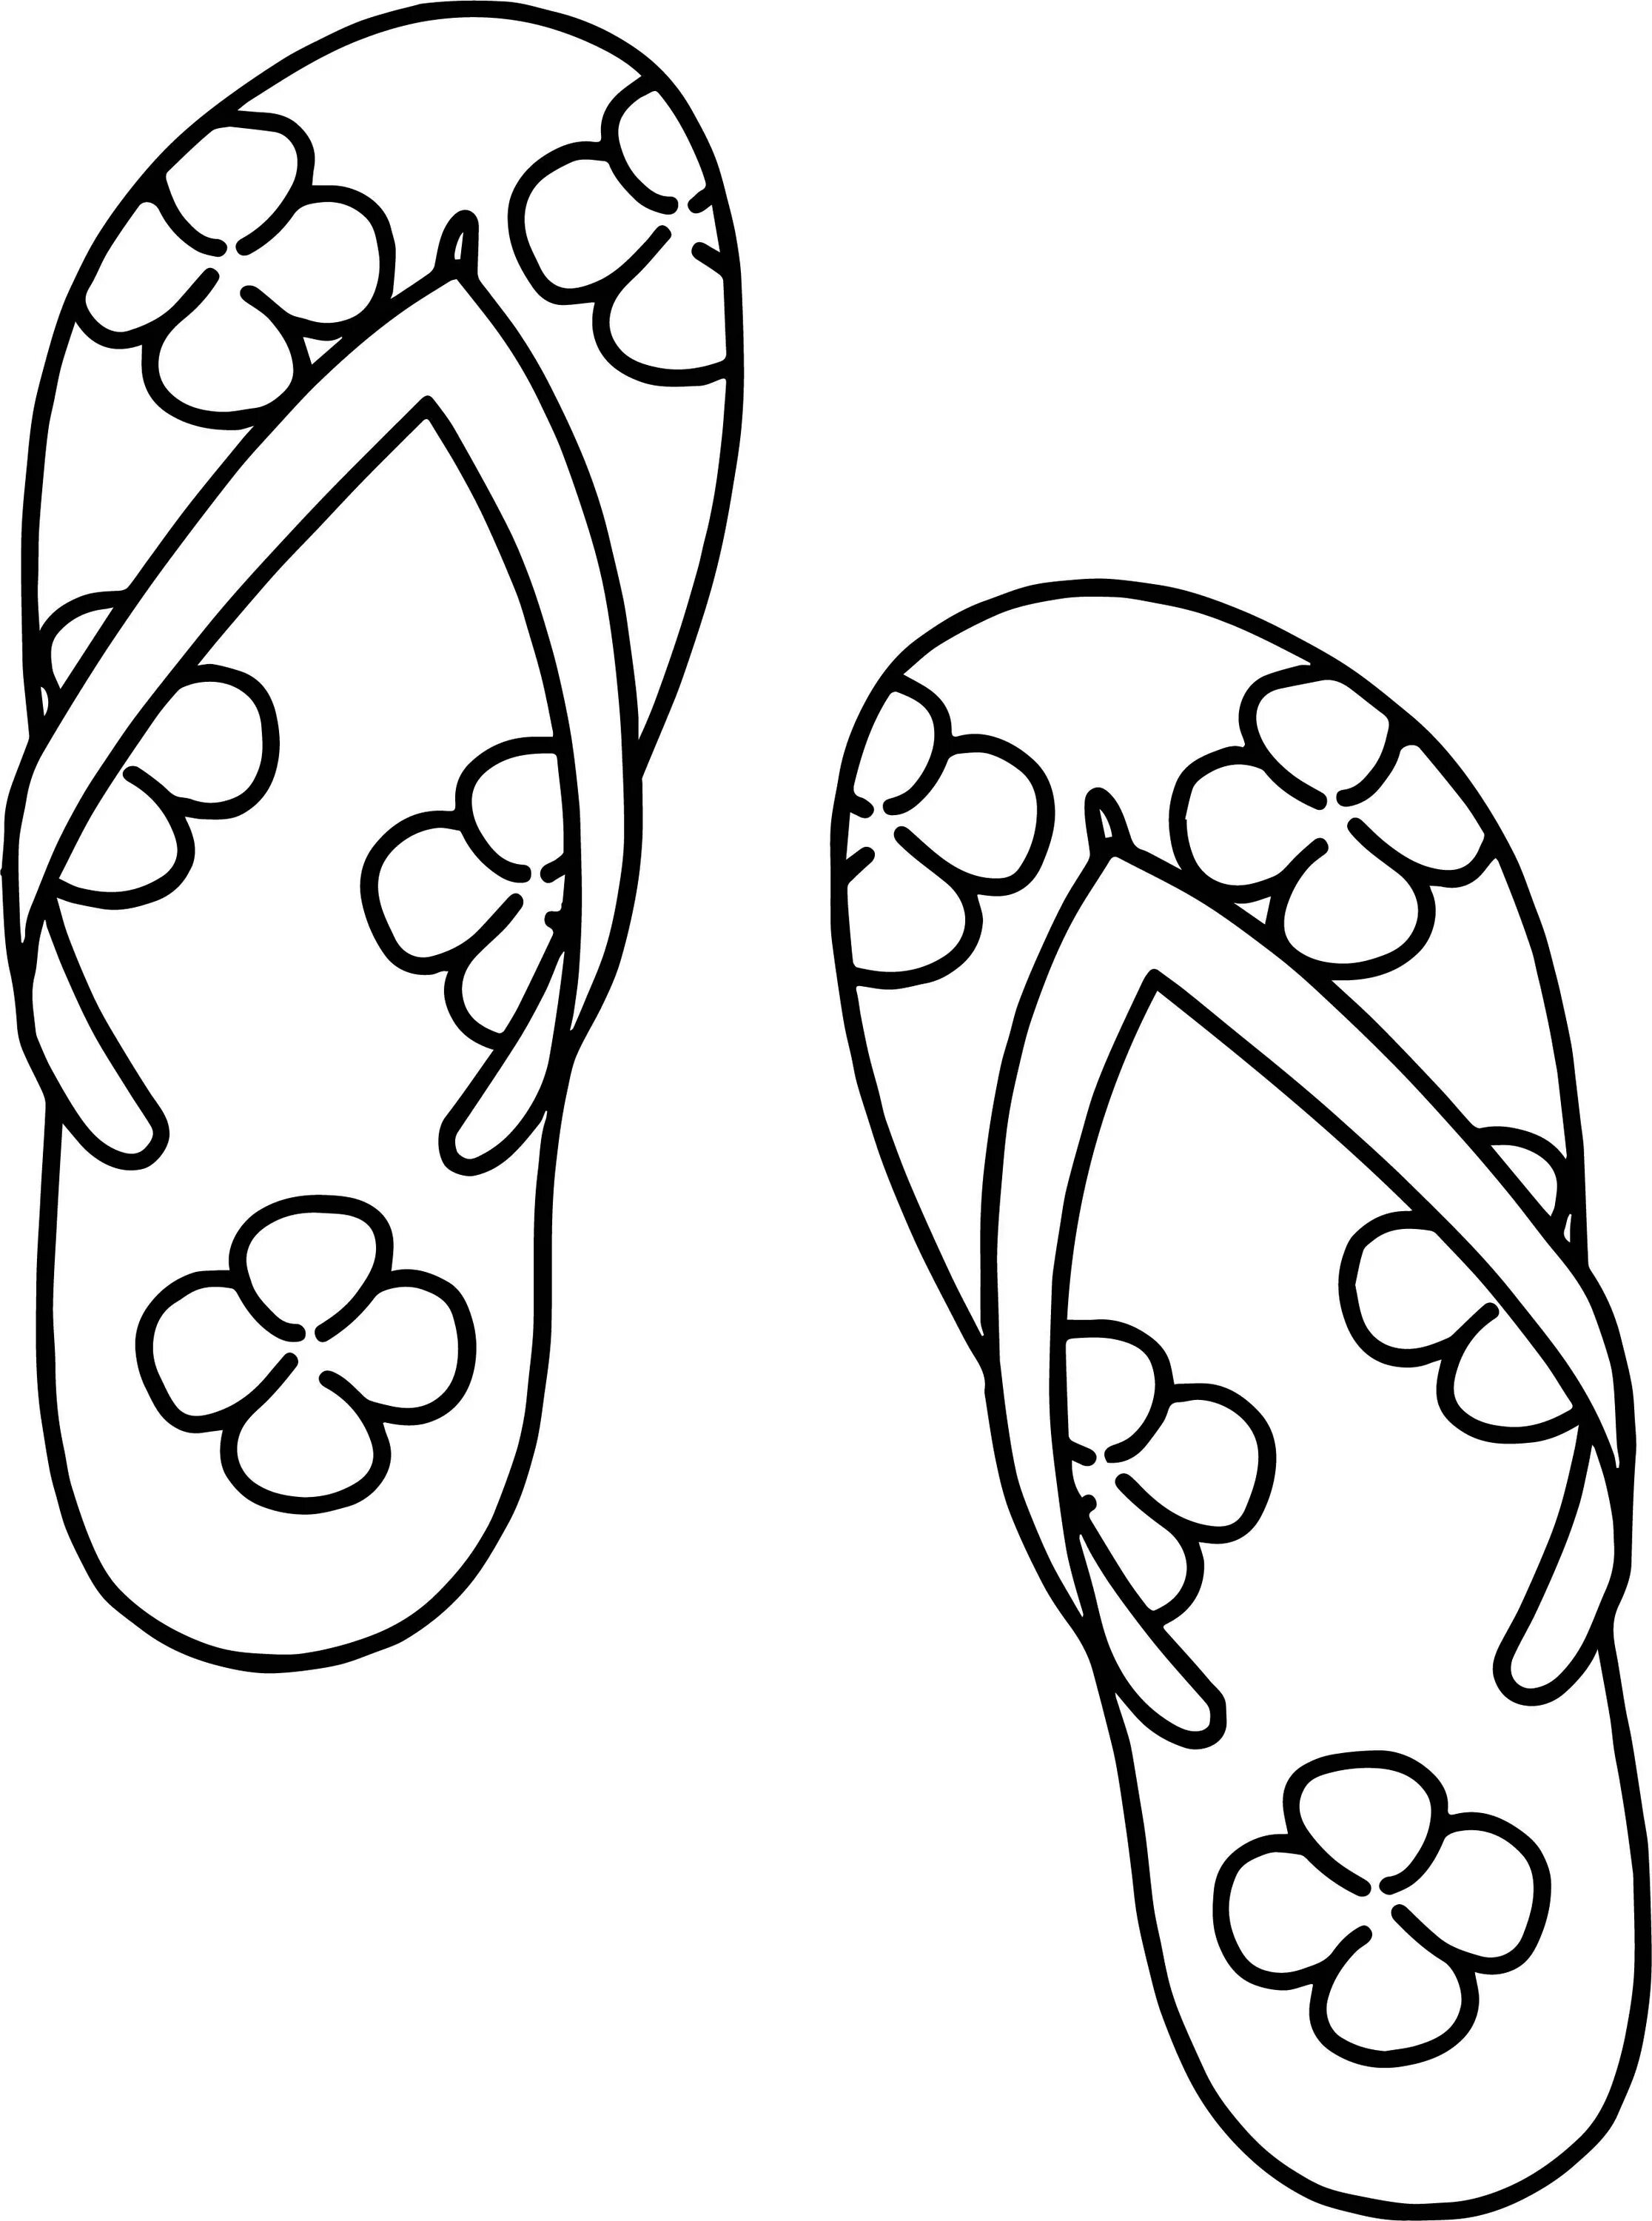 Zany slippers coloring book for babies